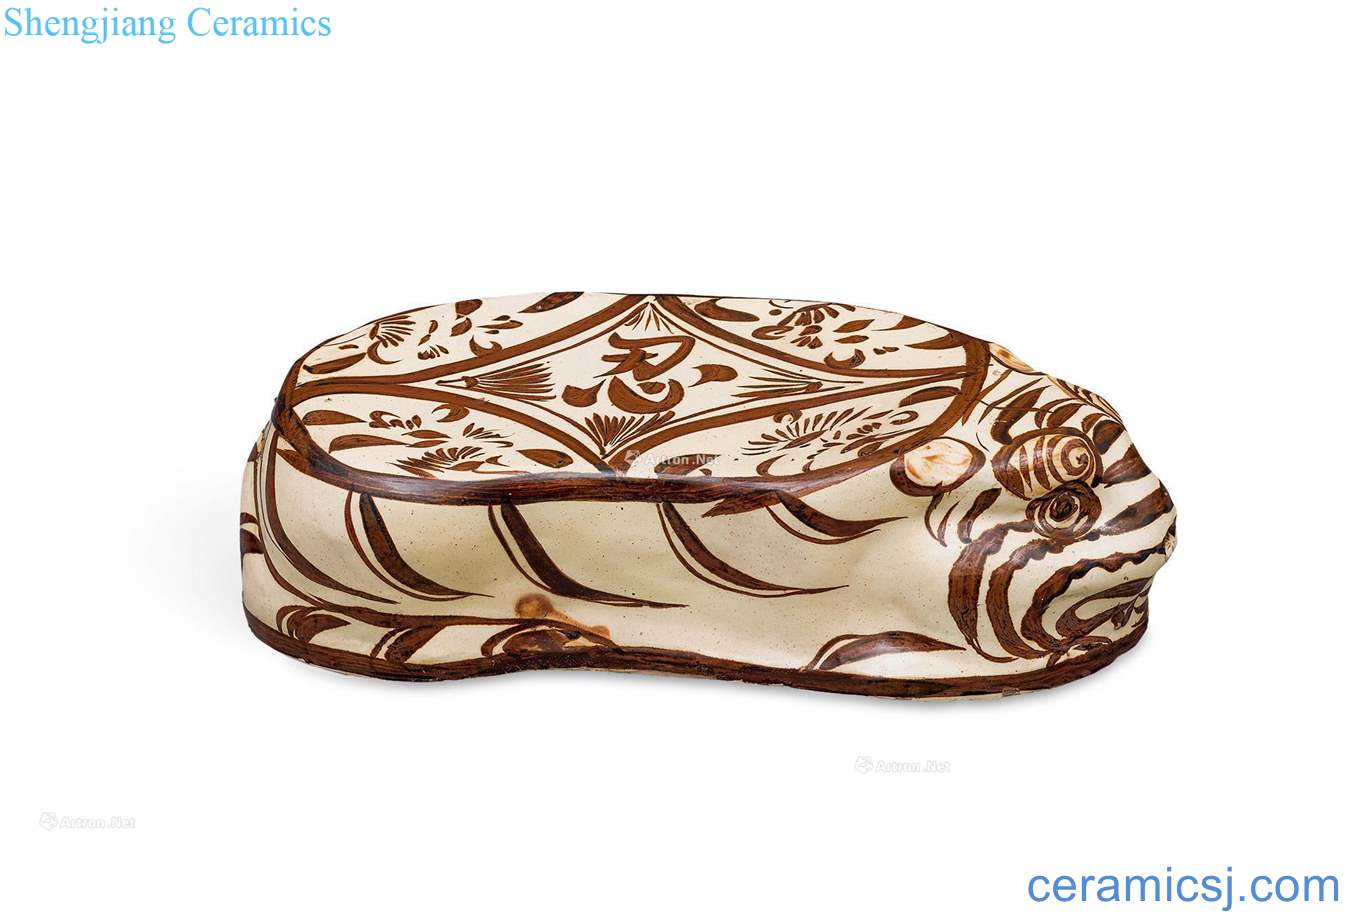 The song dynasty Magnetic state kiln brown color lines tiger porcelain pillow "endure" word